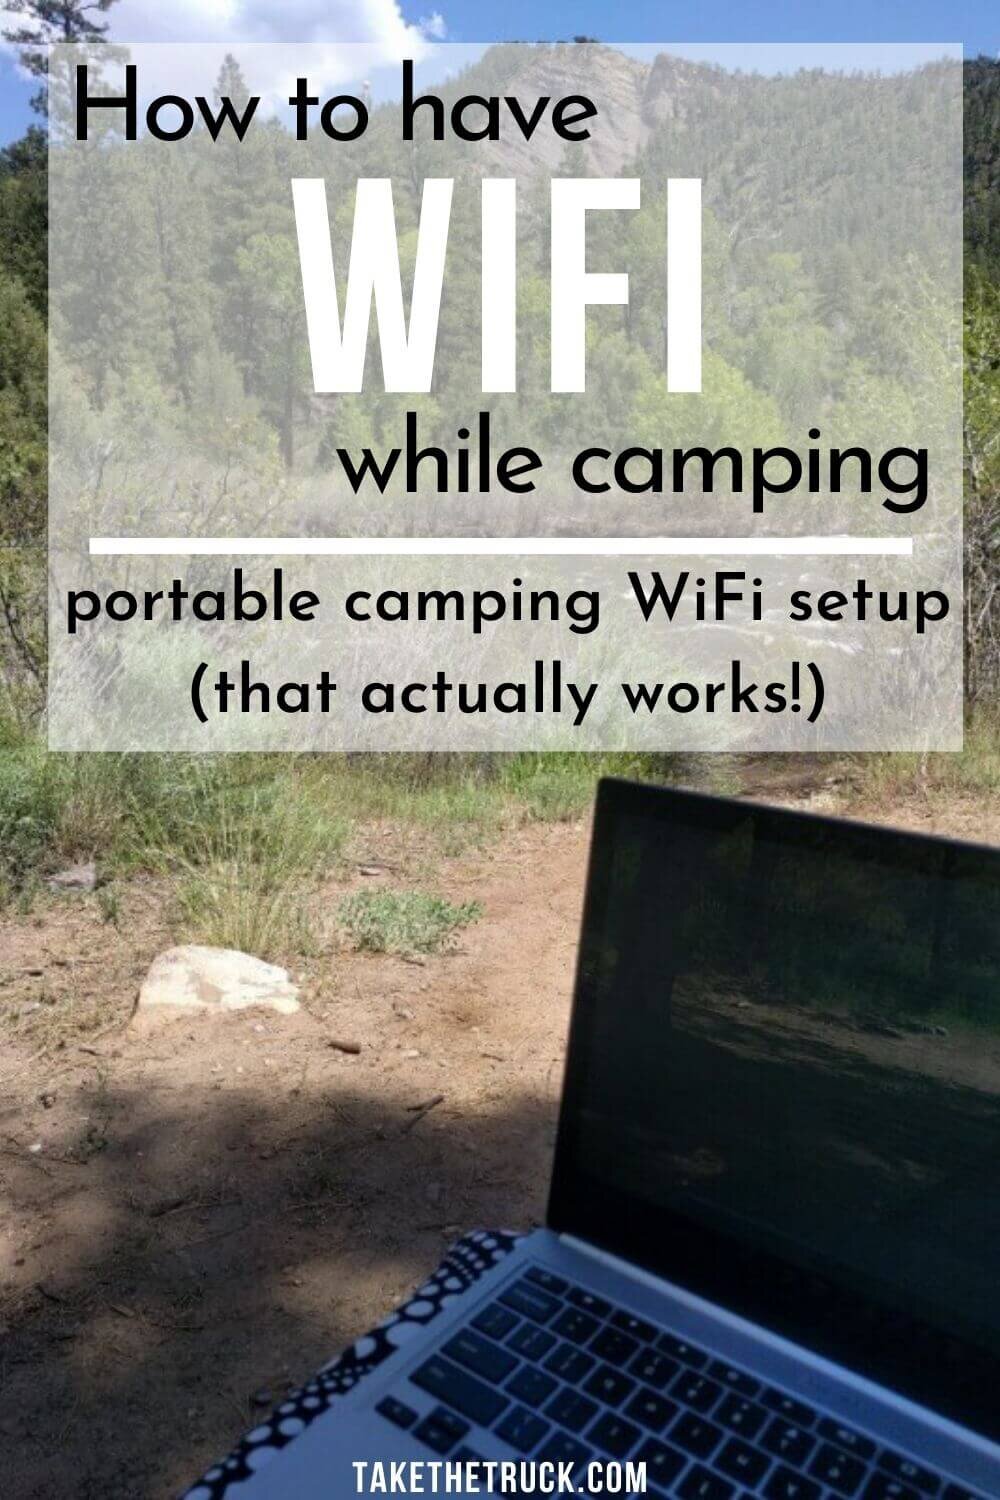 Read this if you need wifi while camping! We’ve finally found a portable camping wifi antenne and cell signal booster that helps provide wifi while traveling, RVing, or camping.